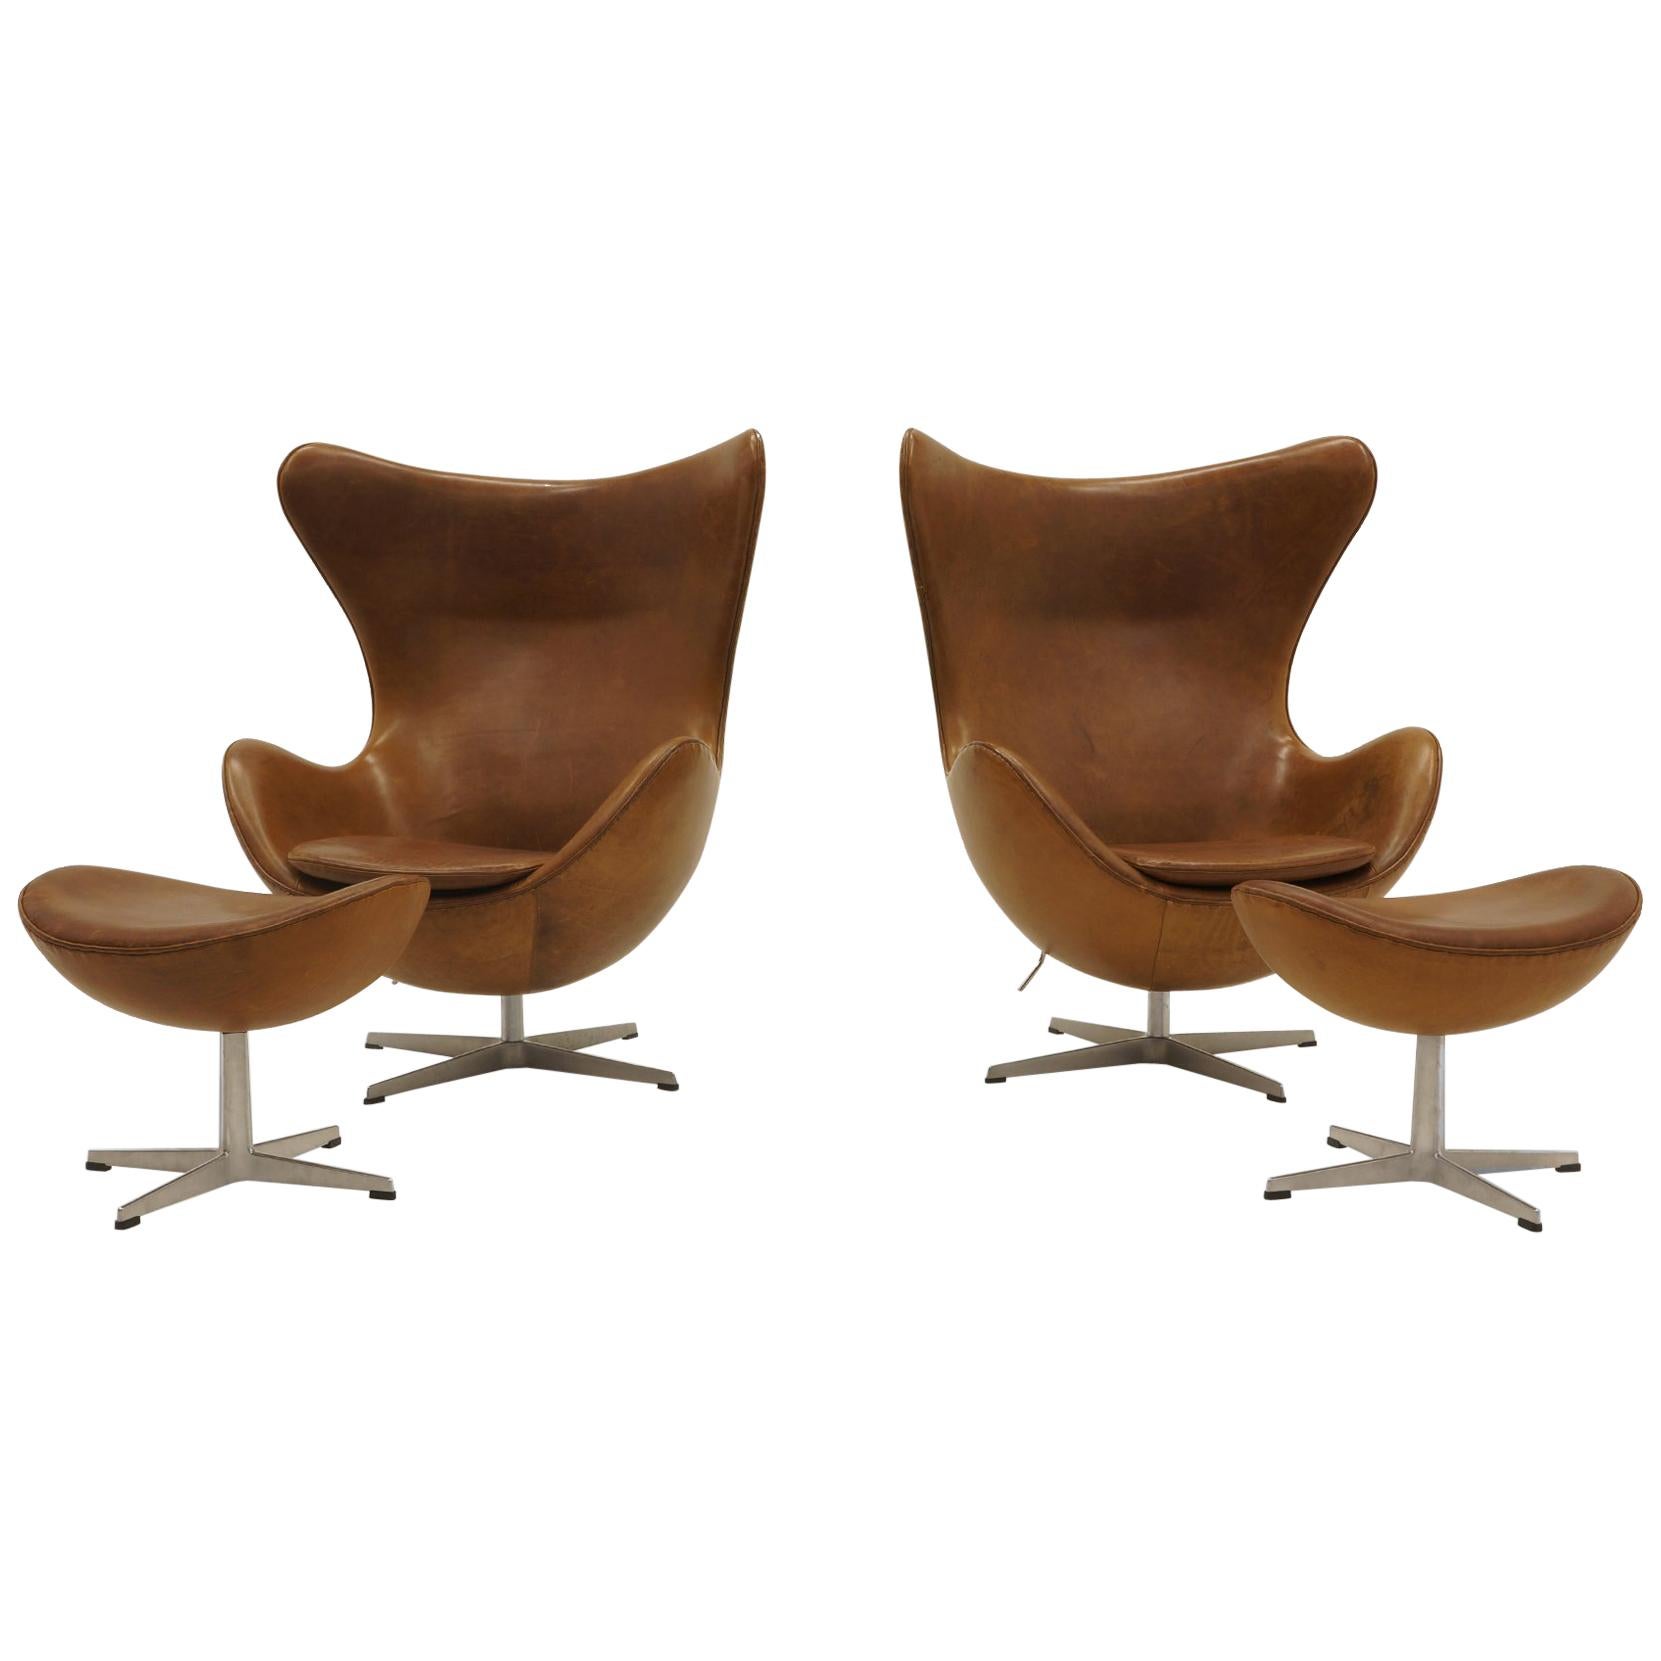 Pair Arne Jacobsen Egg Chairs with Ottomans, Cognac Leather. Price is for all.